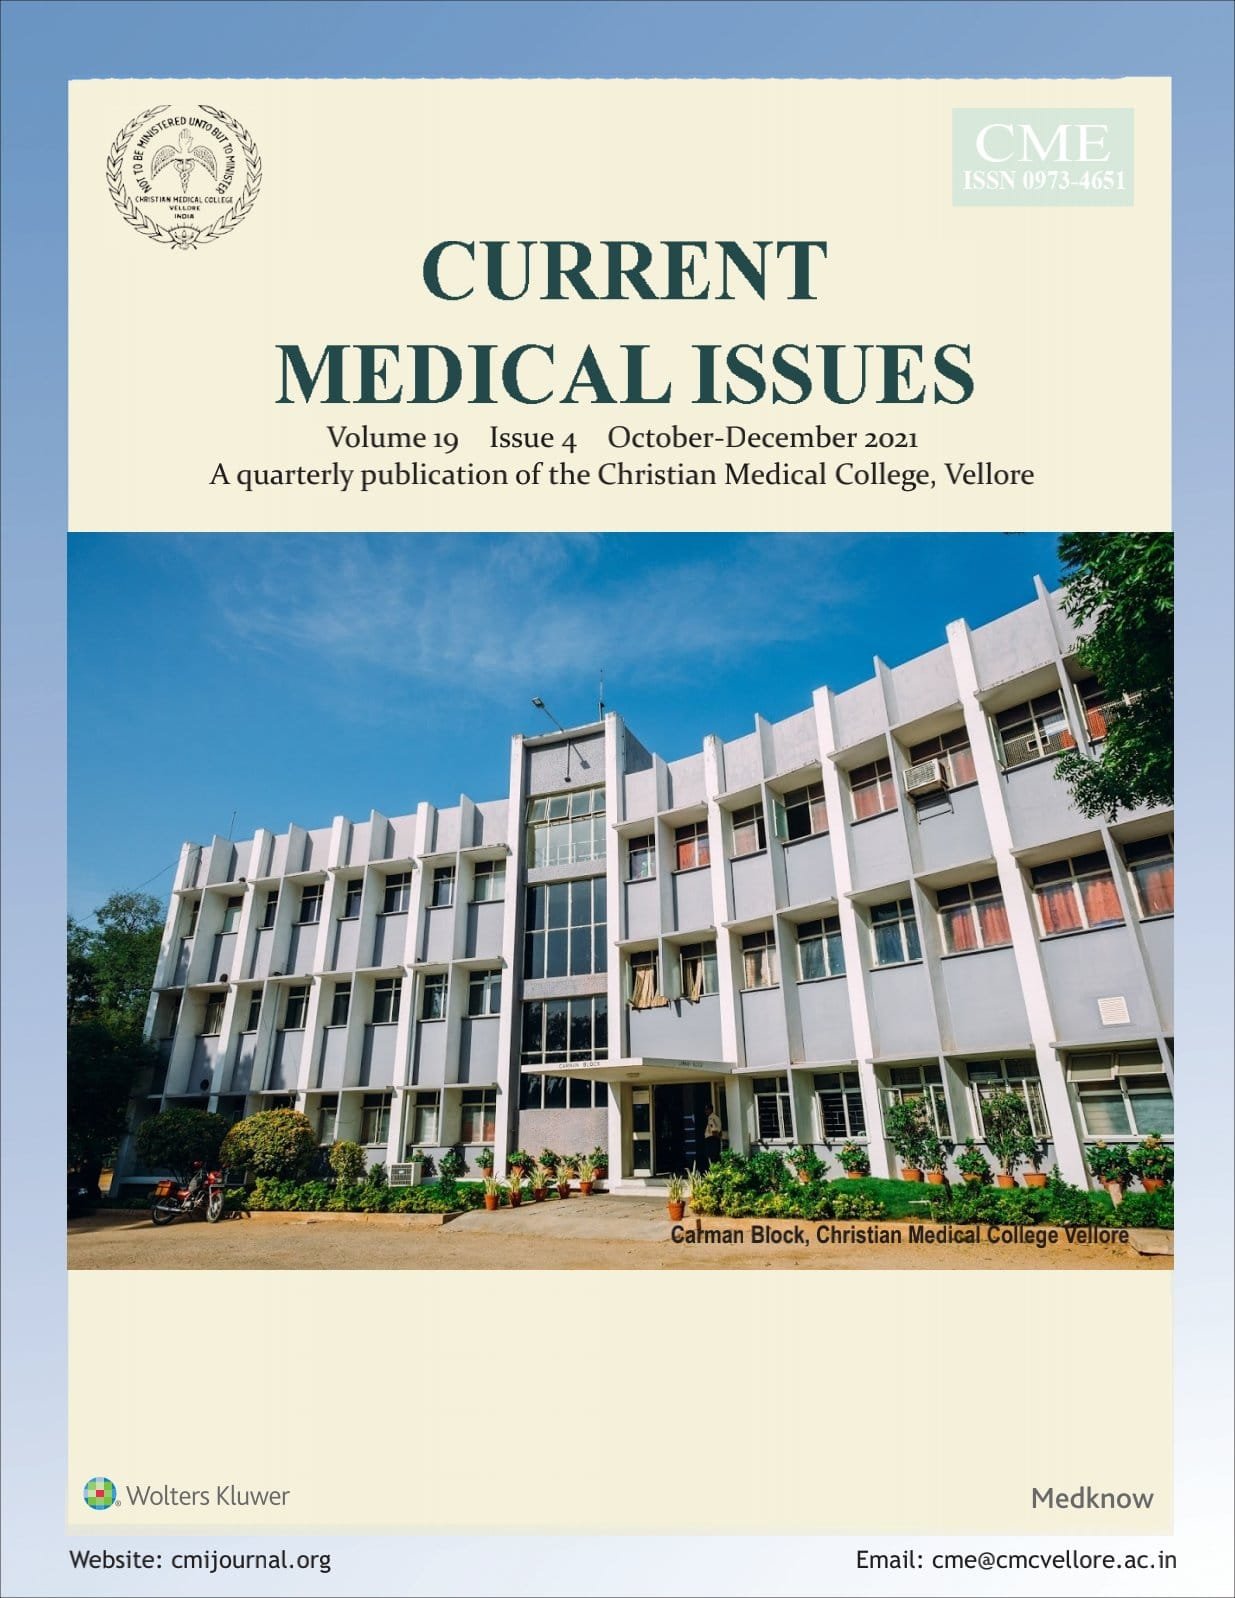 Article on Covid Published in CMC Vellore's Journal